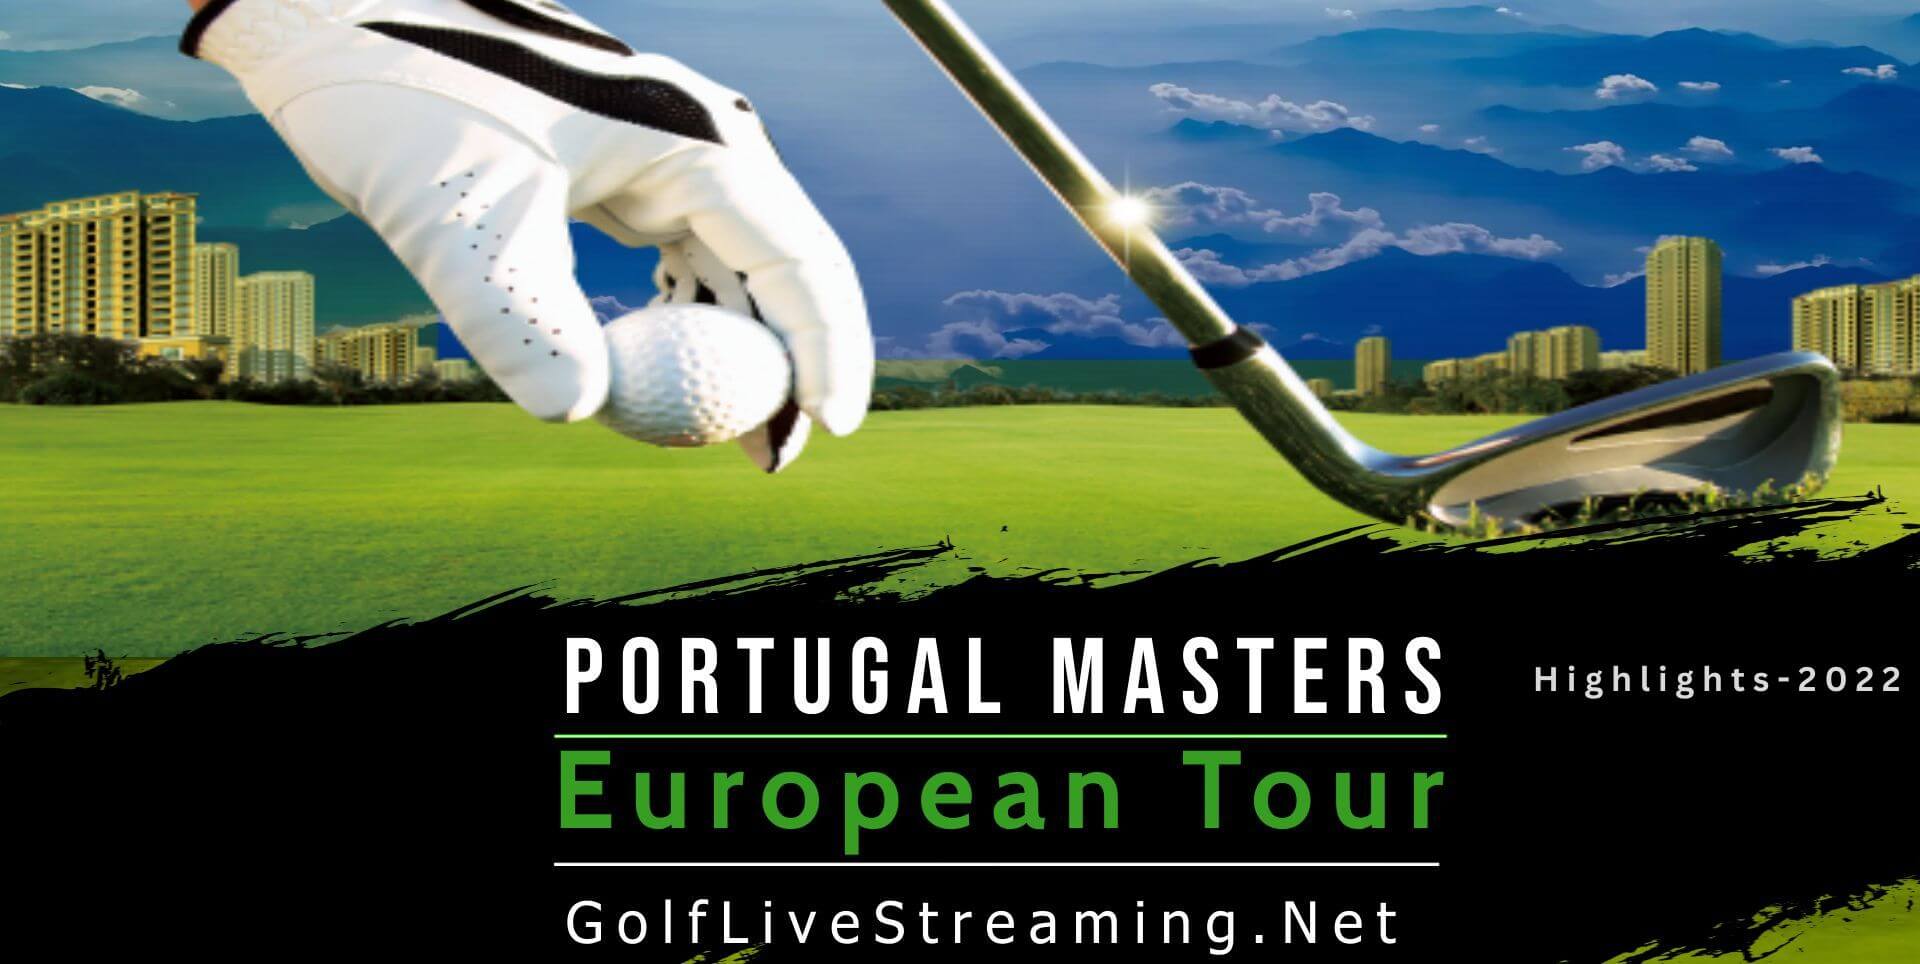 Portugal Masters Round 4 Highlights 2022 European Tour